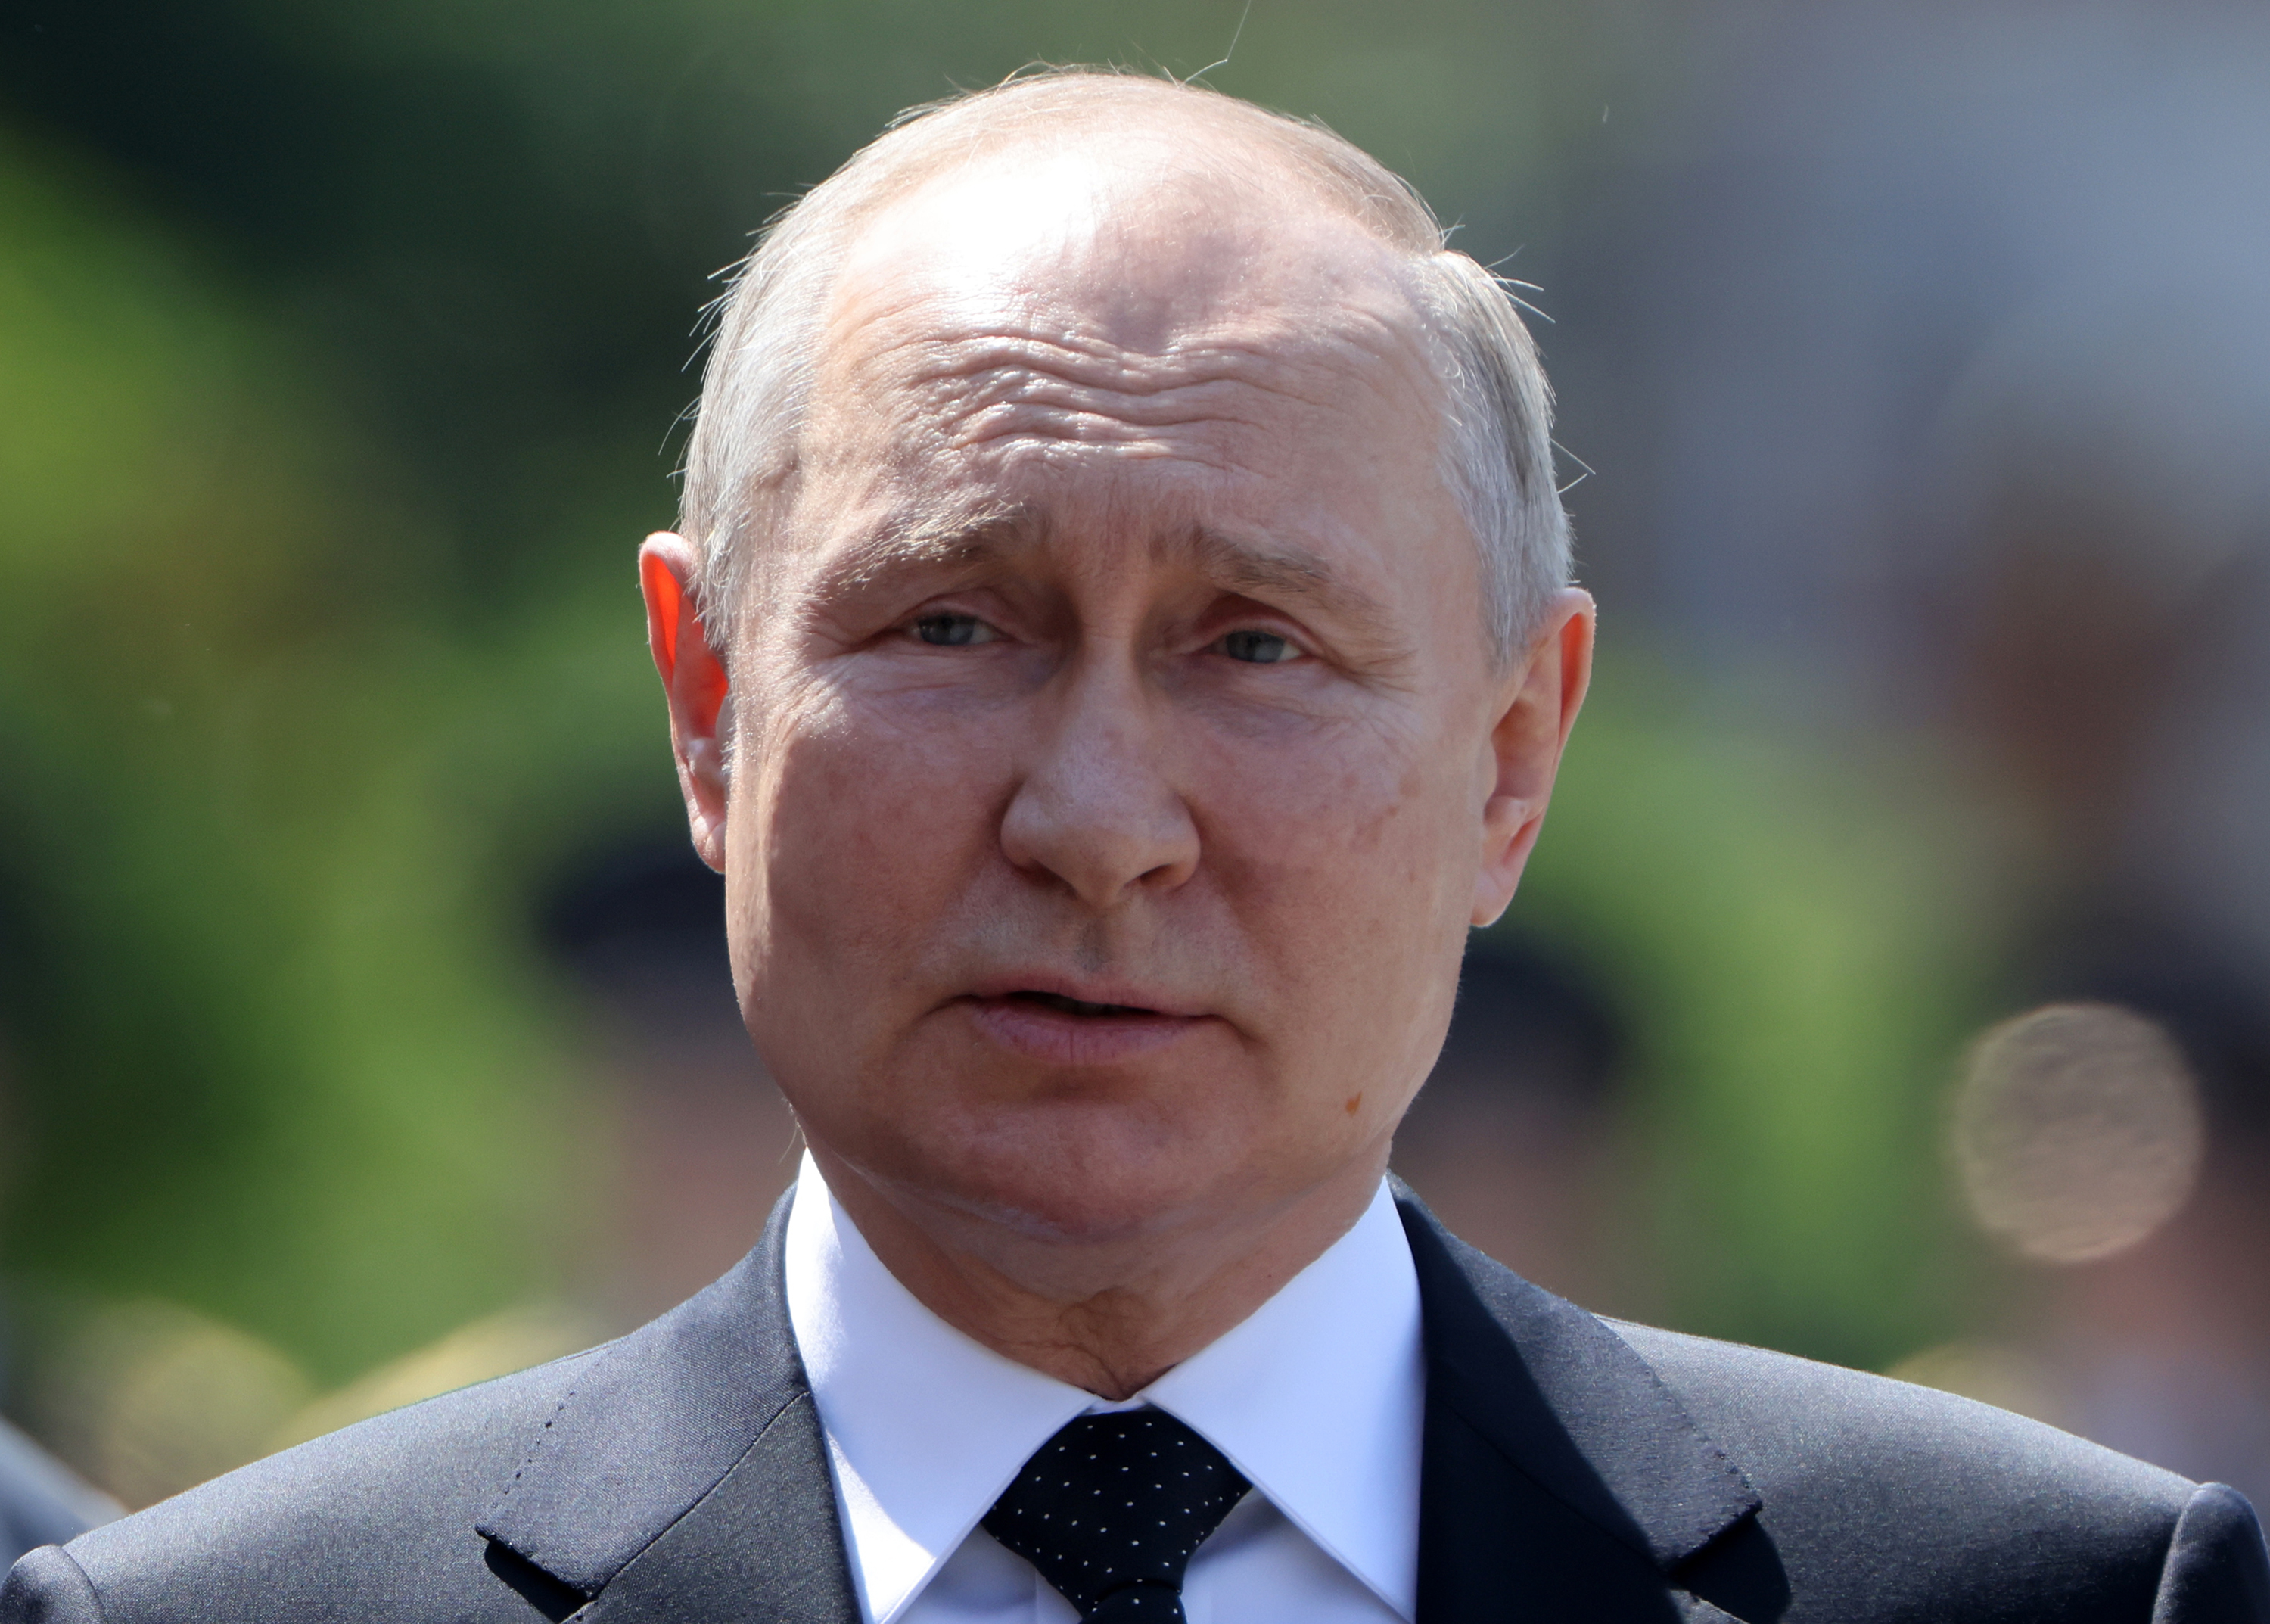 Russian President Vladimir Putin is seen during a ceremony, marking the Day of Remembrance and Sorrow, June 22, in Moscow.